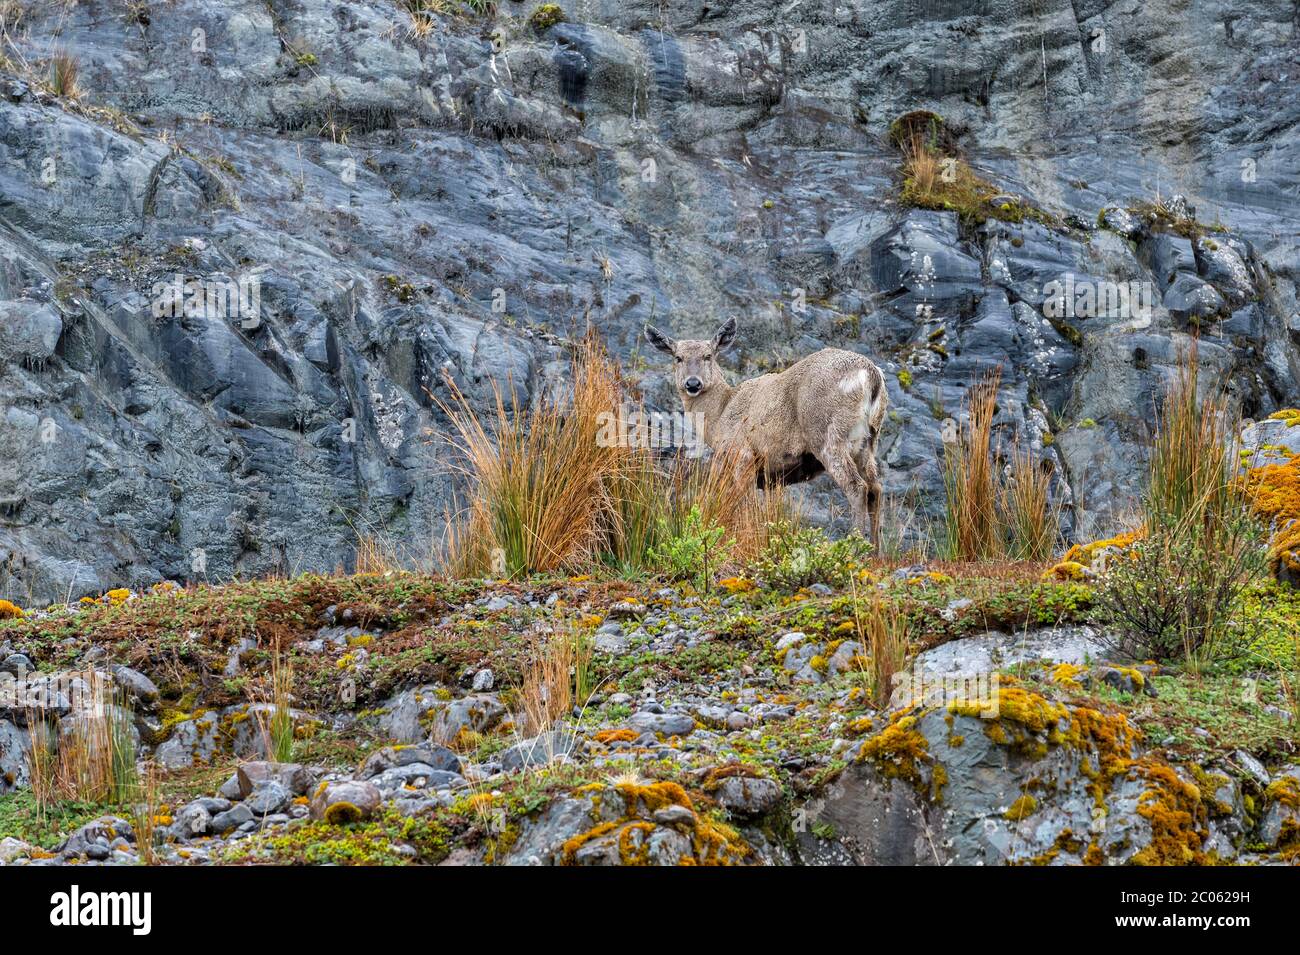 Female South Andean Deer (Hippocamelus bisulcus) in a rocky environment, Aysen Region, Patagonia, Chile Stock Photo